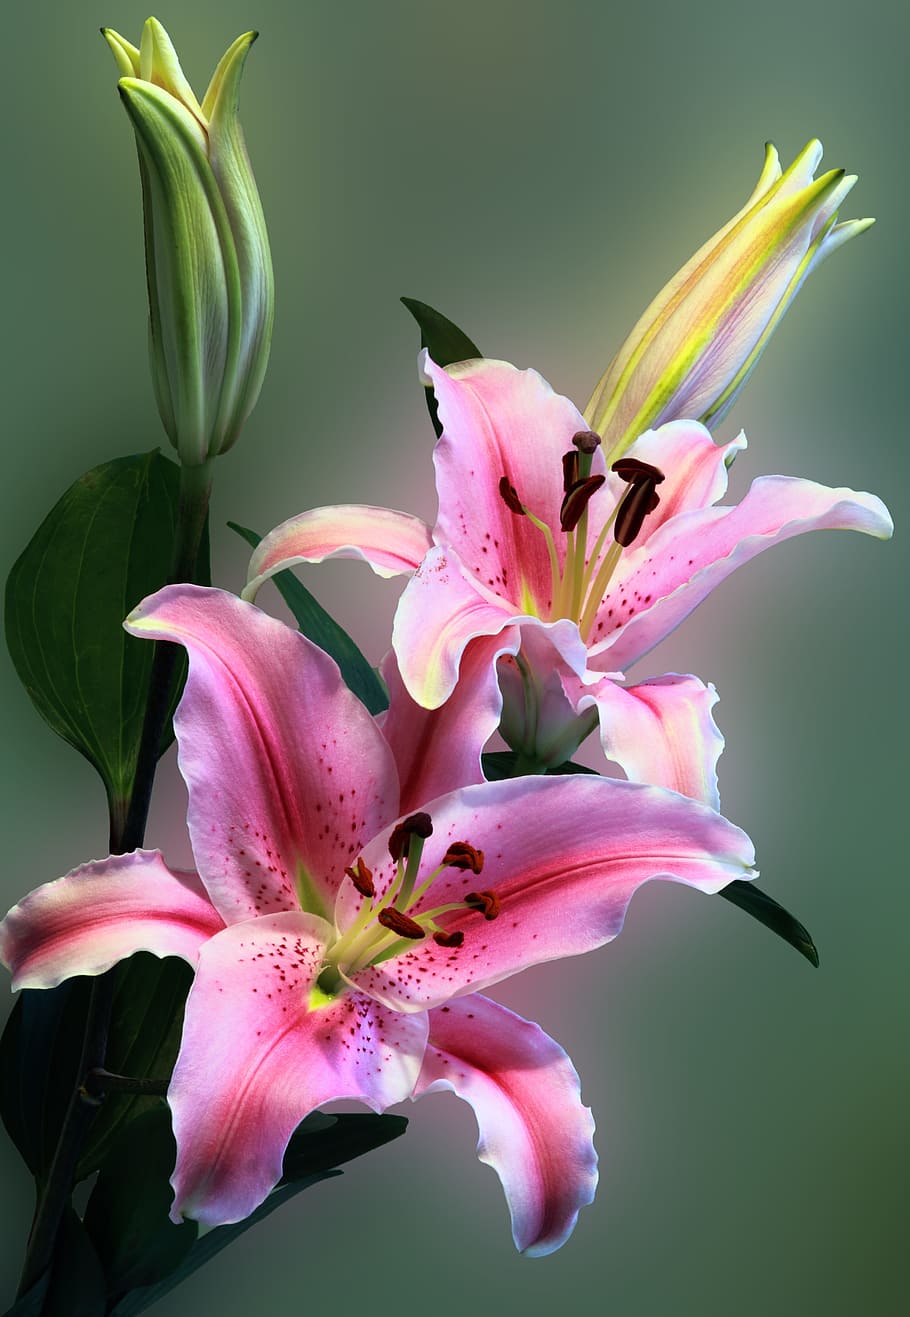 pink petal flower in shallow focus photography, lily, floral